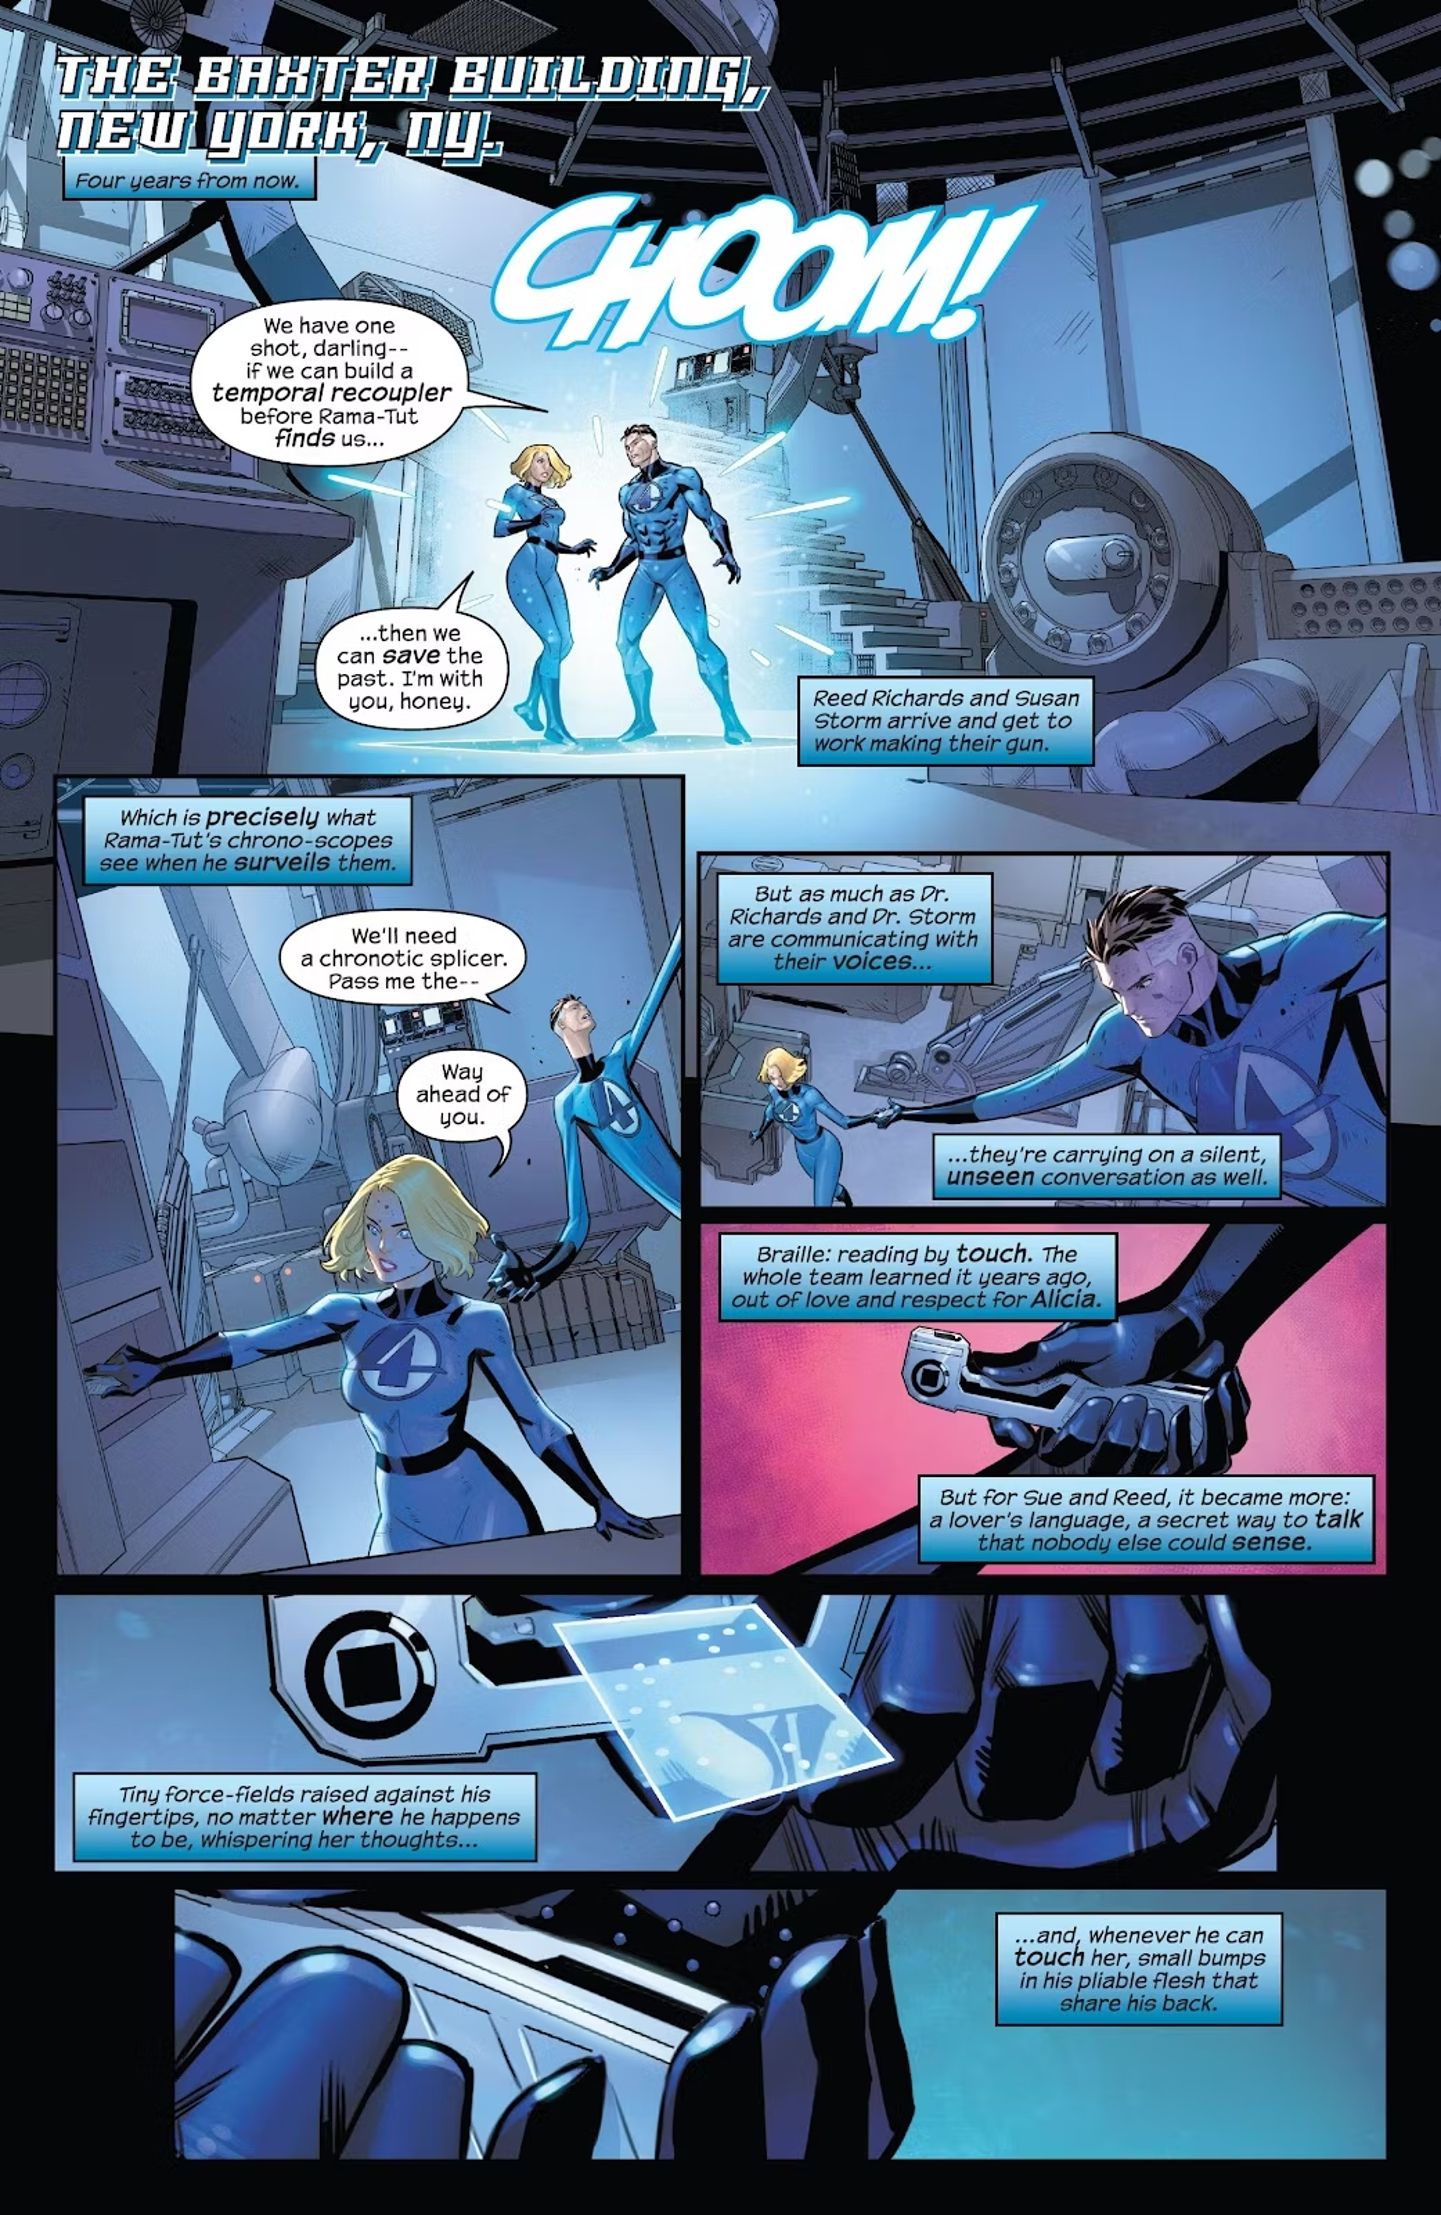 Mr. Fantastic and the Invisible Woman use Braille to communicate and design a weapon in their laboratory. 